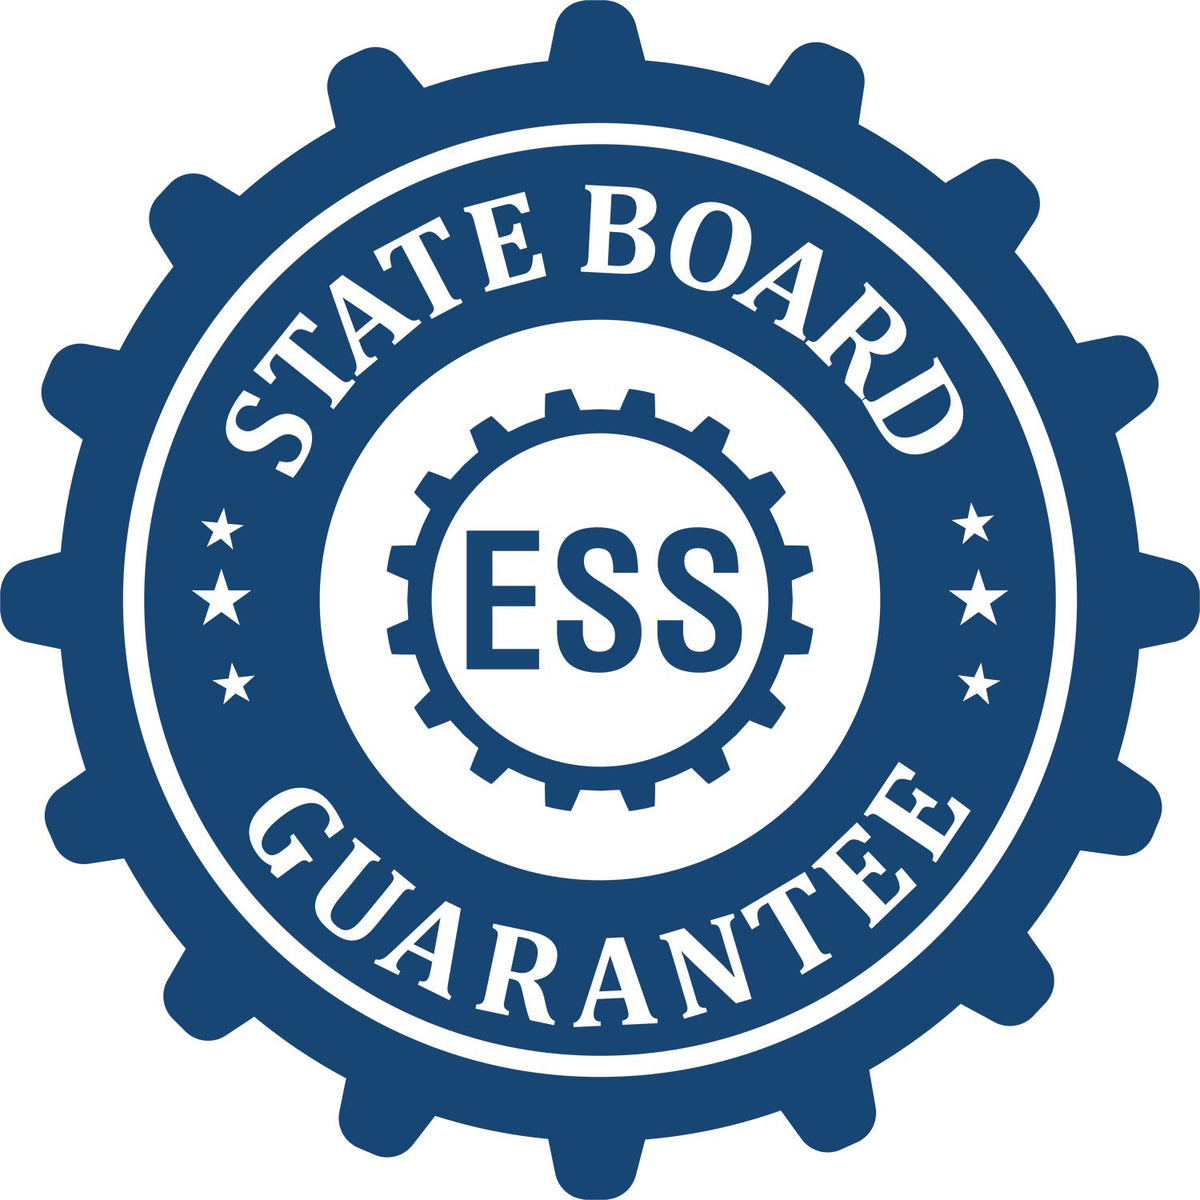 An emblem in a gear shape illustrating a state board guarantee for the Heavy-Duty Georgia Rectangular Notary Stamp product.